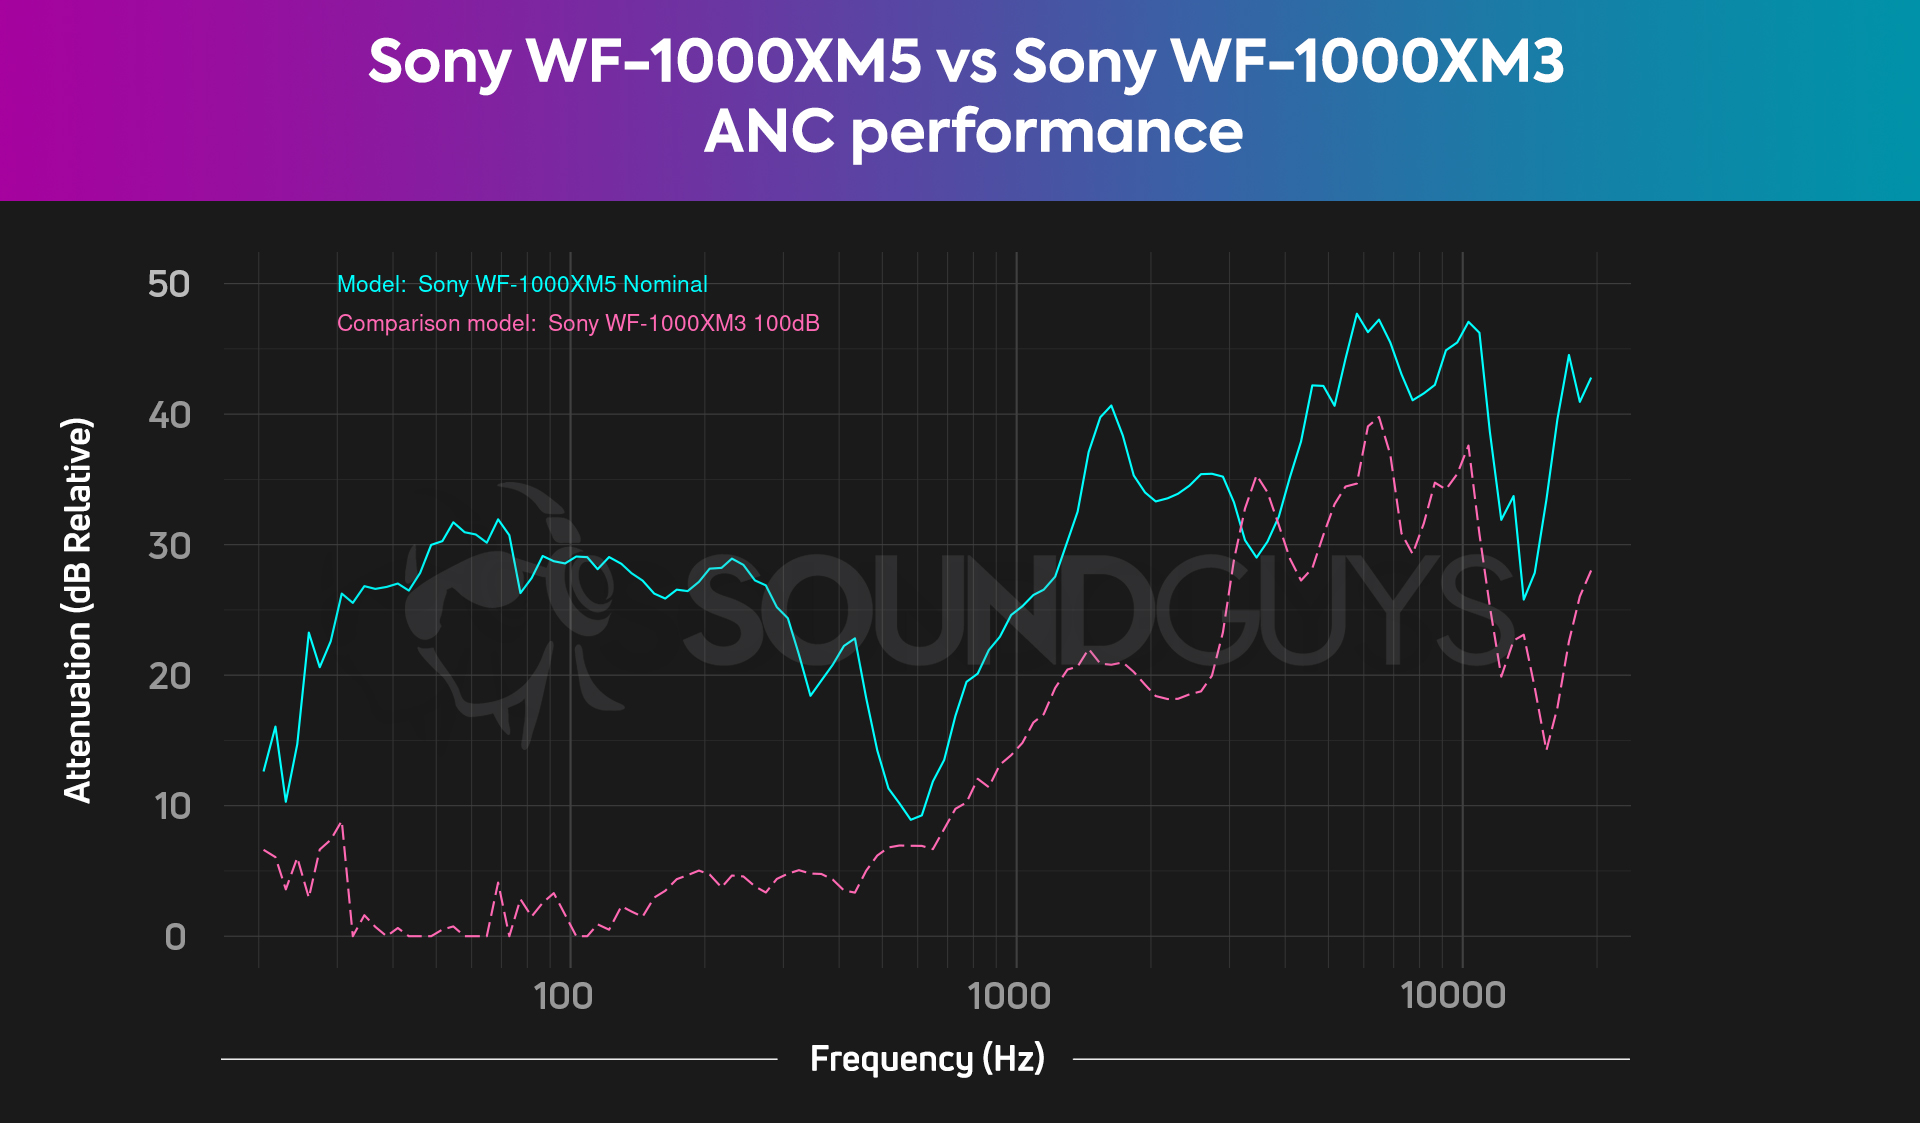 A chart shows the holistic isolation and ANC results of the Sony WF-1000XM5 and Sony WF-1000XM3.